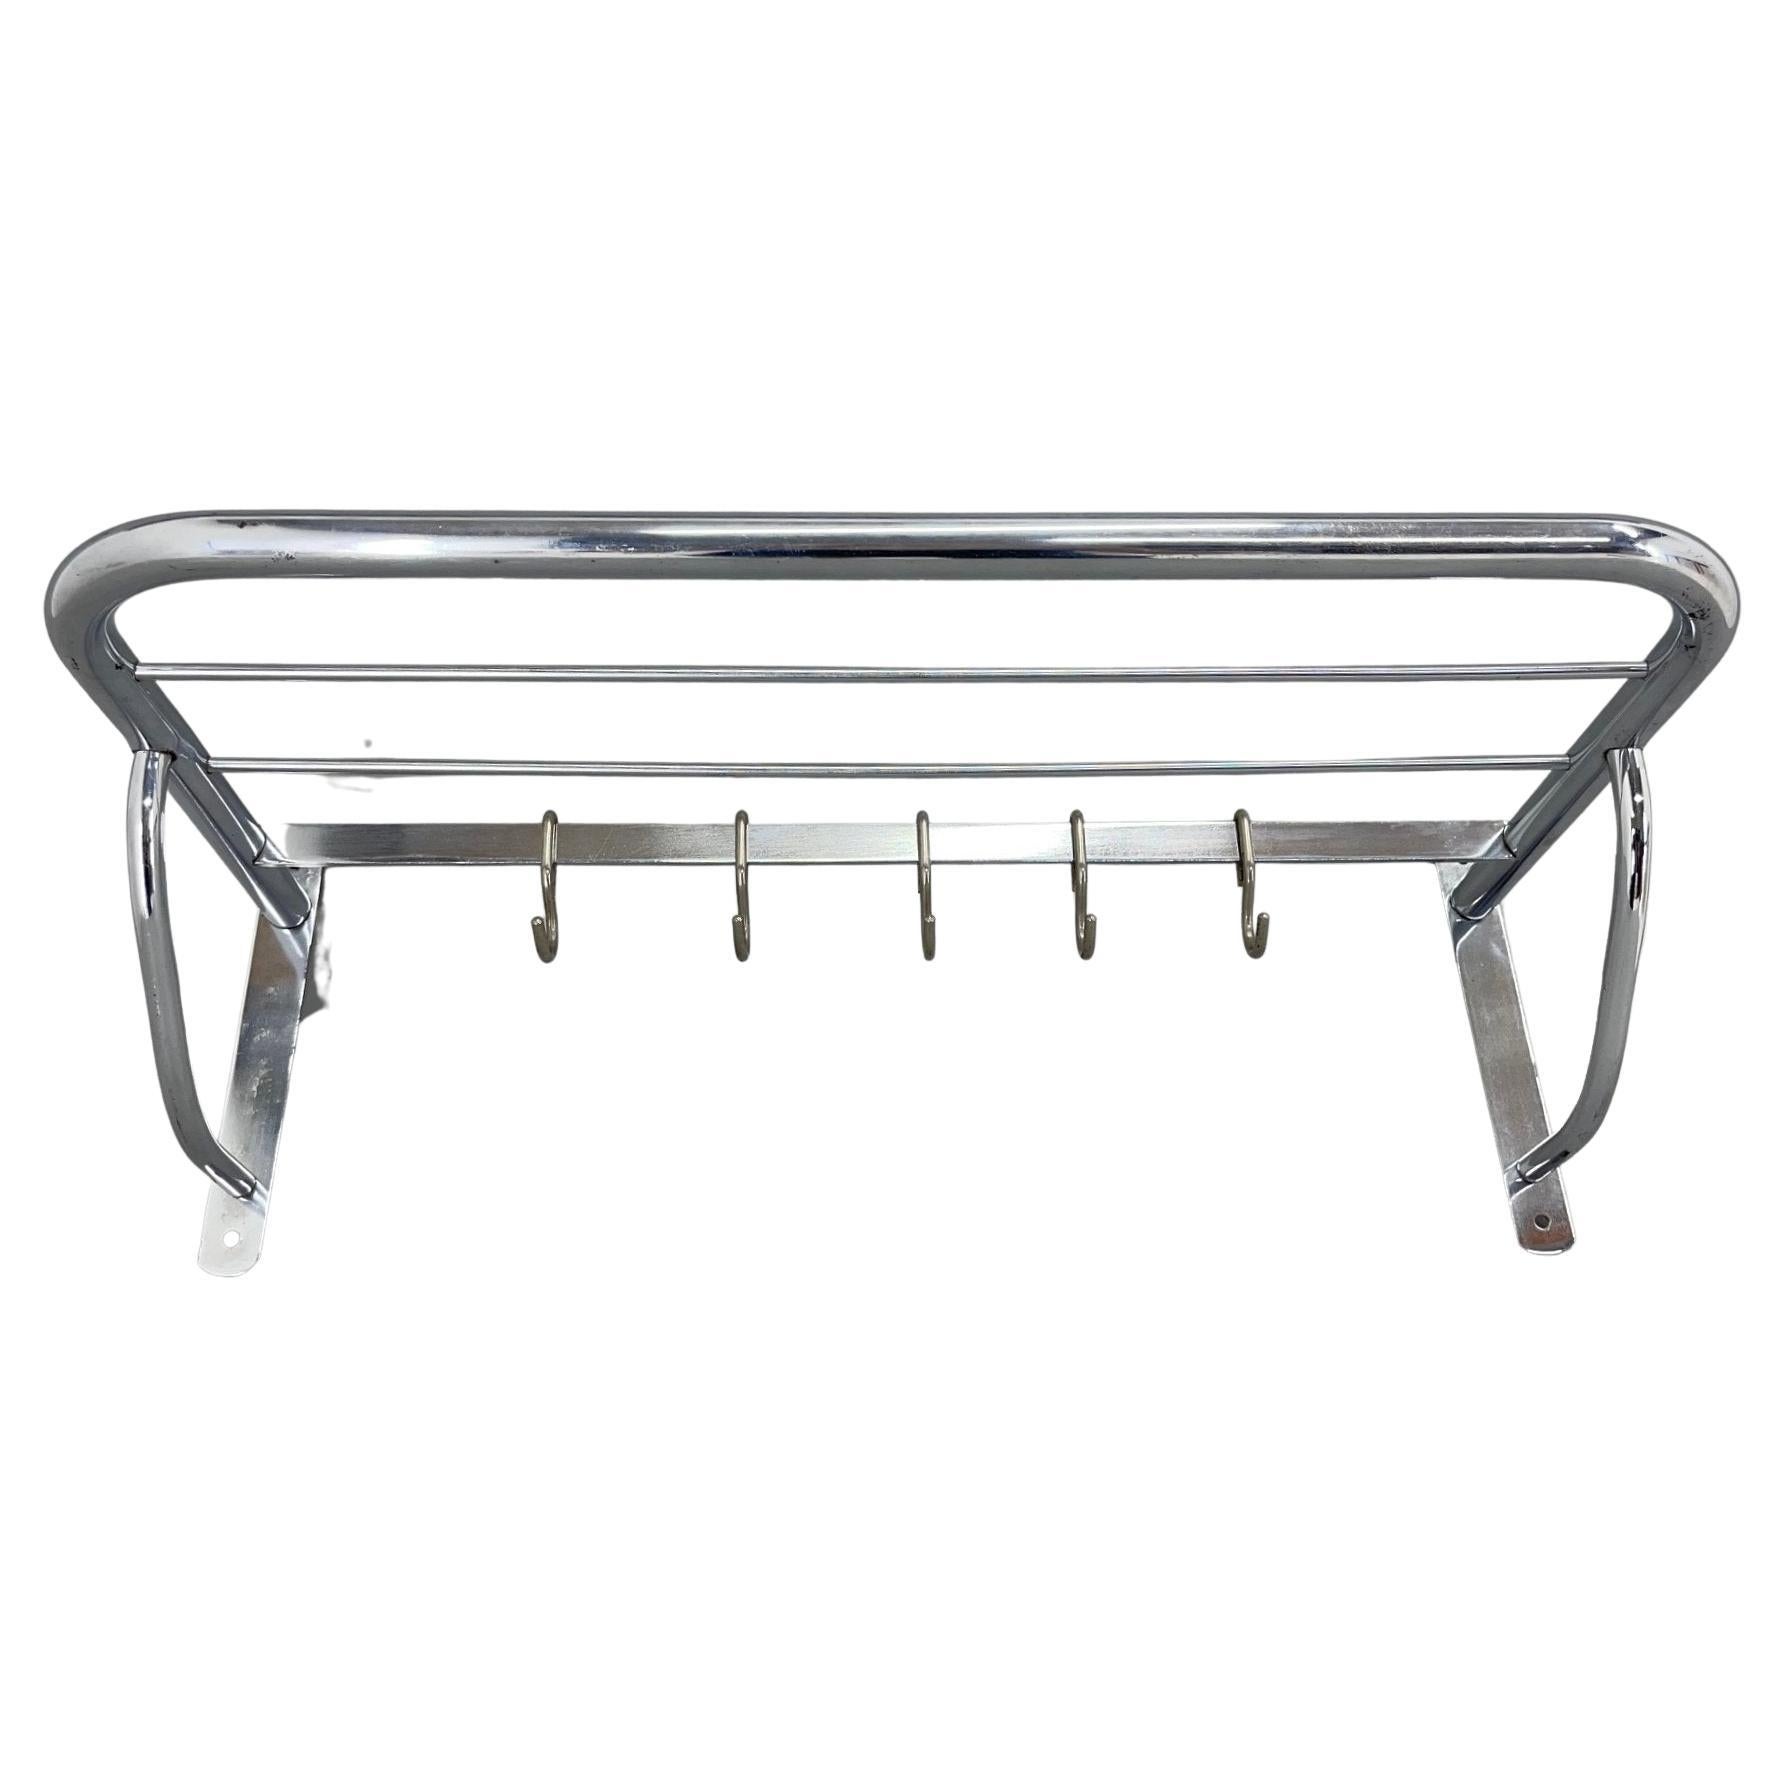 1930's Bauhaus or Functionalist Chrome Wall Coat Hanger For Sale